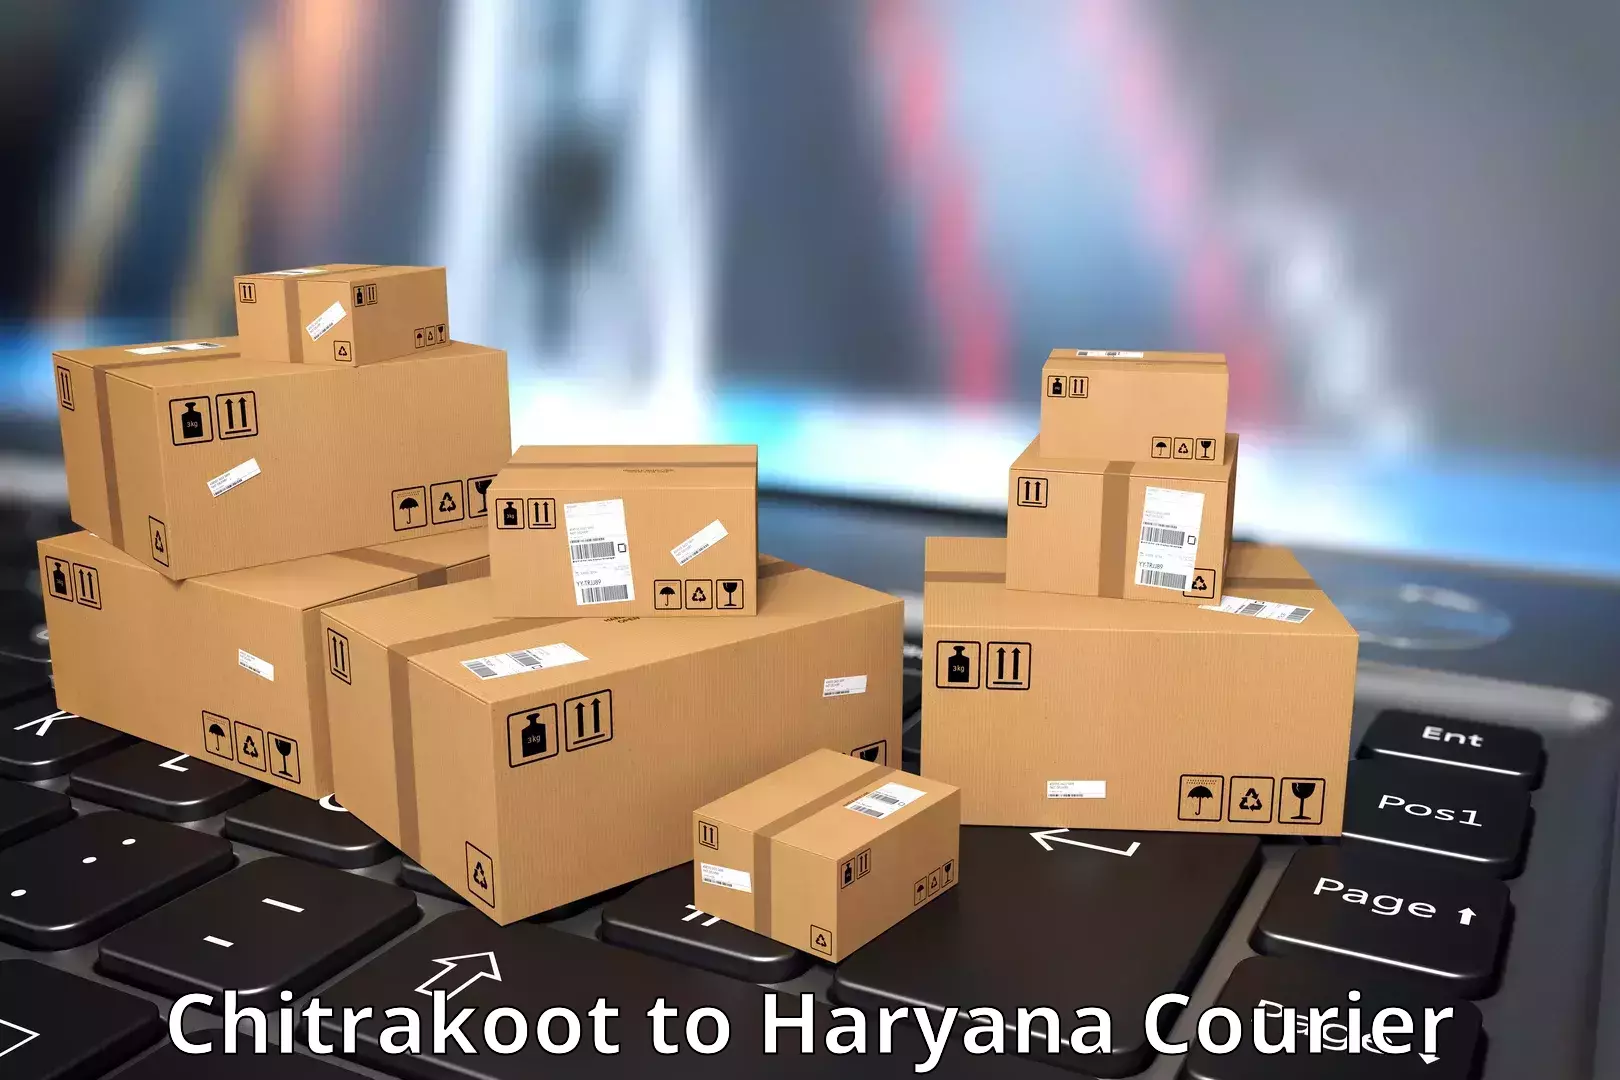 Full-service courier options Chitrakoot to Chaudhary Charan Singh Haryana Agricultural University Hisar